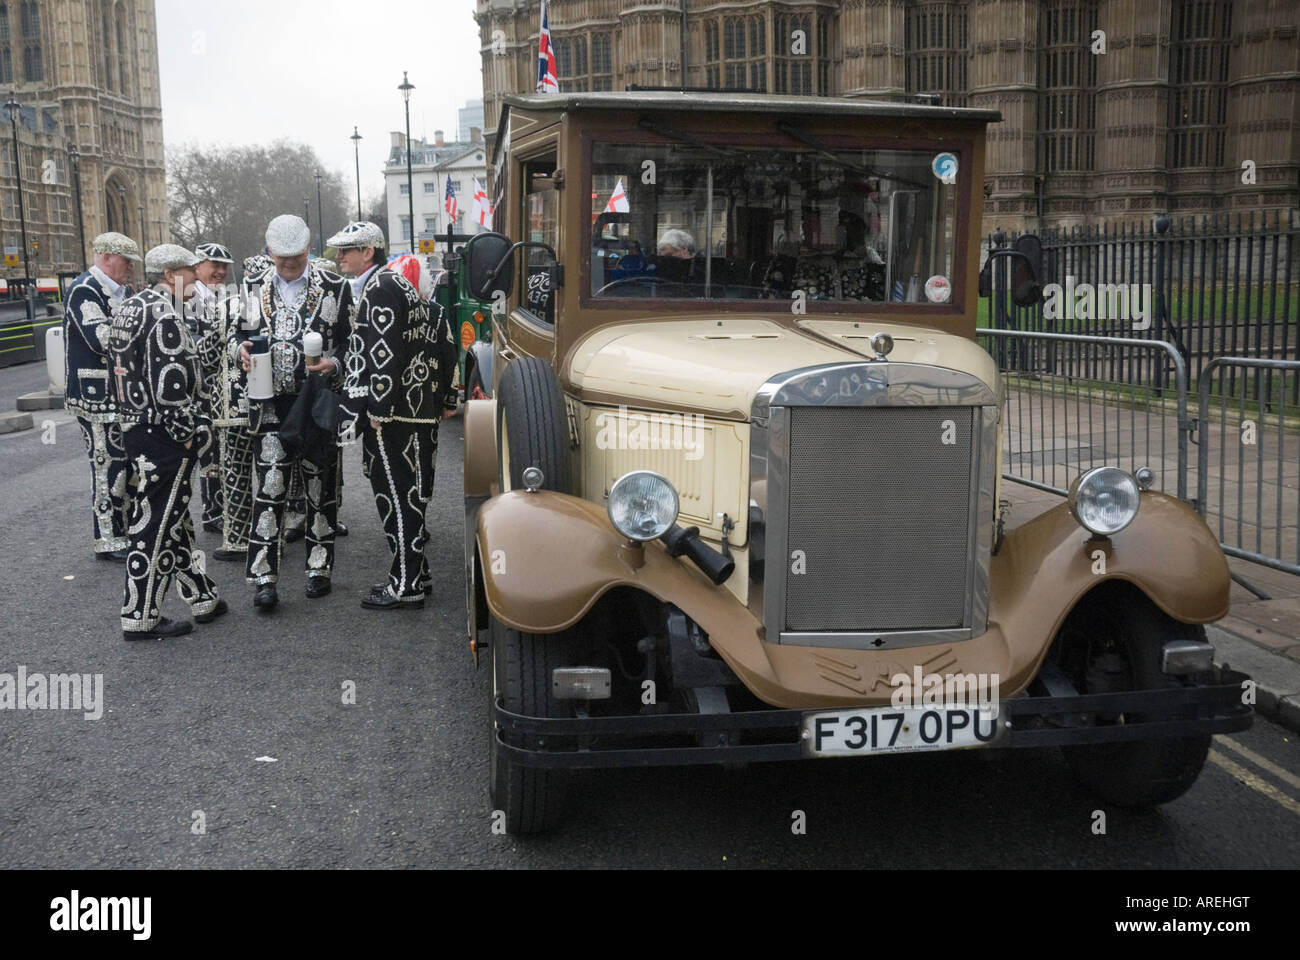 A vintage charabanc parked in front of Westminster Abbey and the Houses of Parliament with a group of Pearly Kings, London. Stock Photo